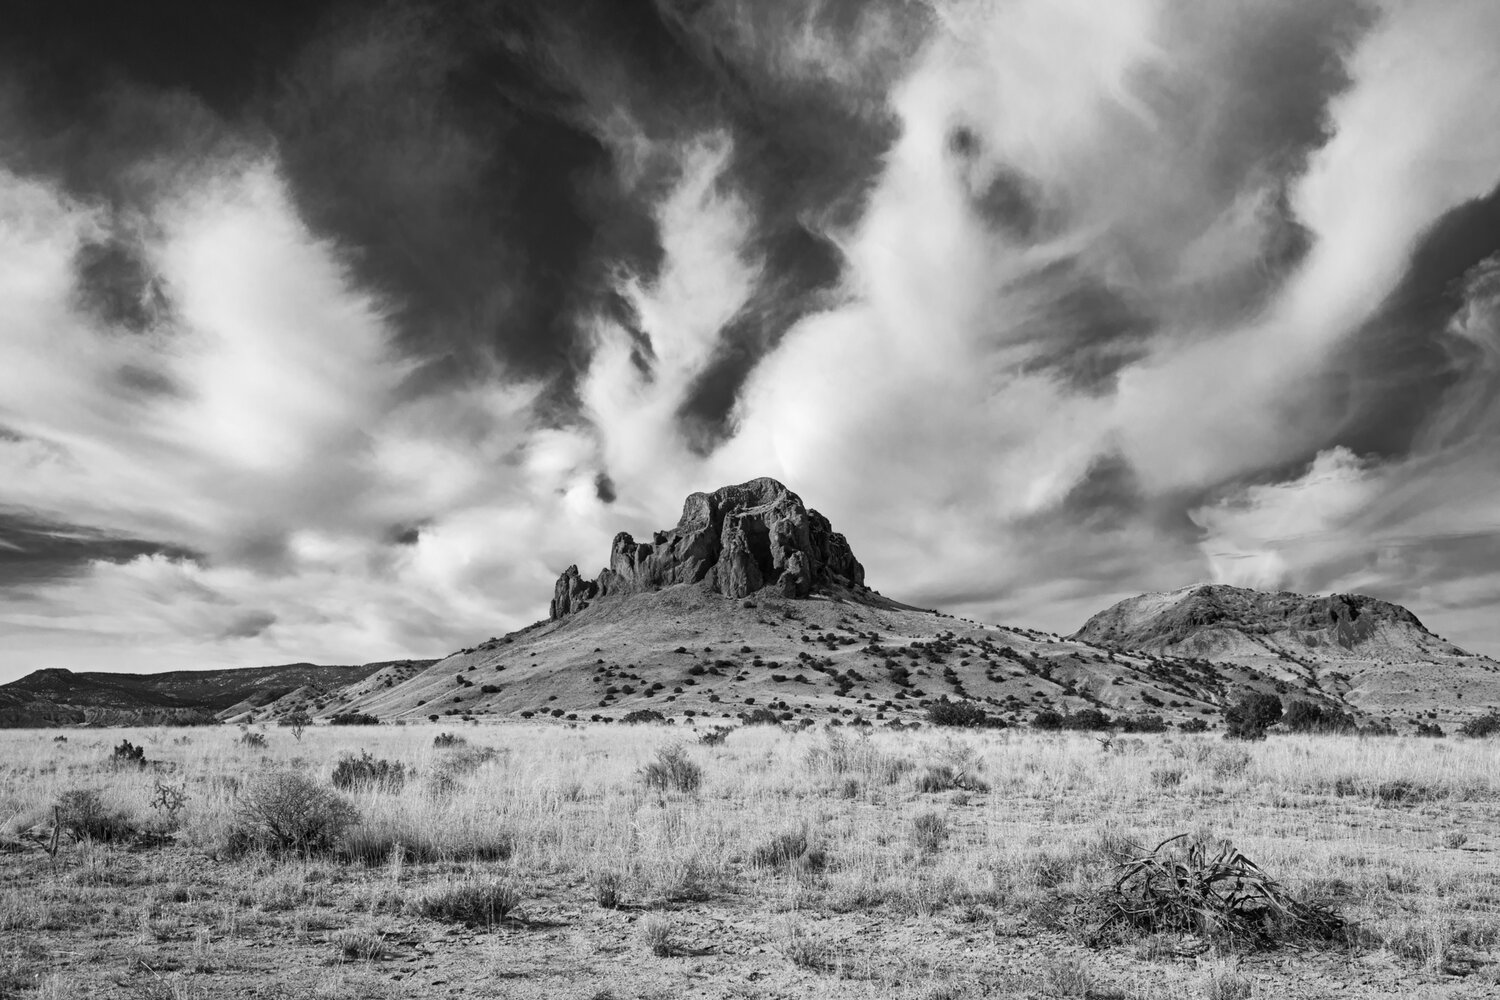 Photographer John Wylie's photo of "Clouds Over Cerro de Guadalupe" is one of many of his photographs of the Rio Puerco Valley on exhibit at Albuquerque's Open Spaces Visitors Center through Sept. 23. (Courtesy photo)